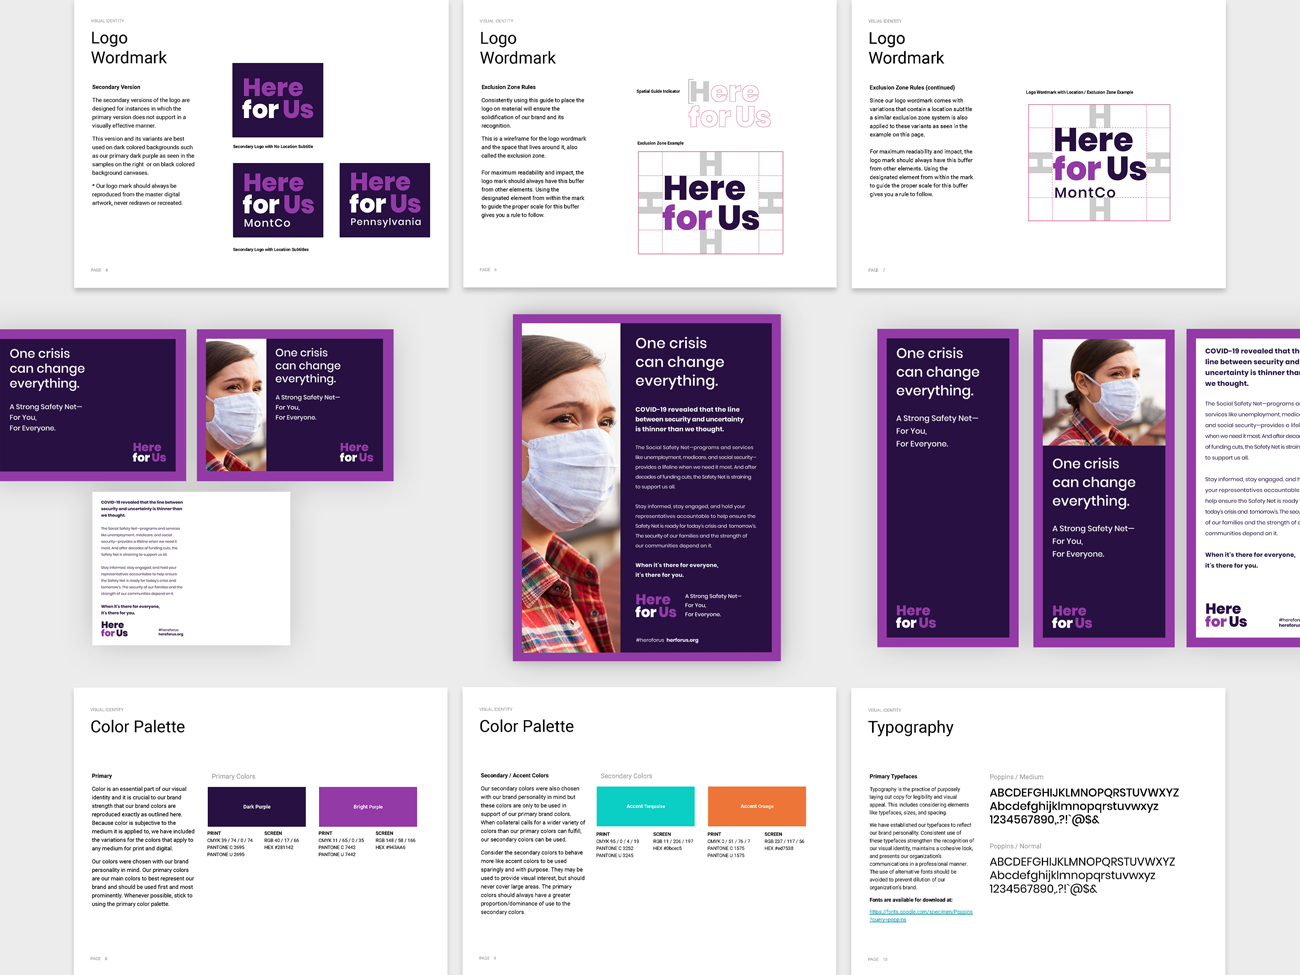 Collage of visual identity and collateral system for the Here for Us campaign